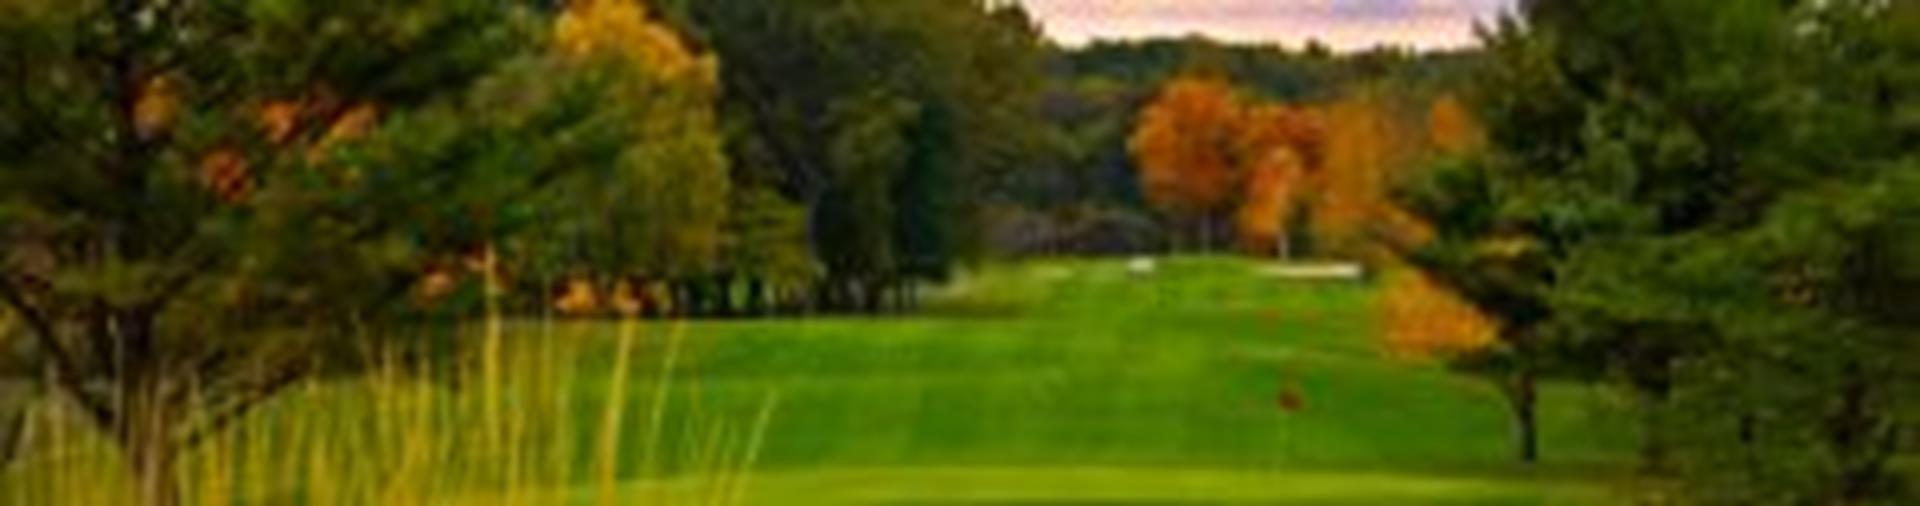 muskegon country club